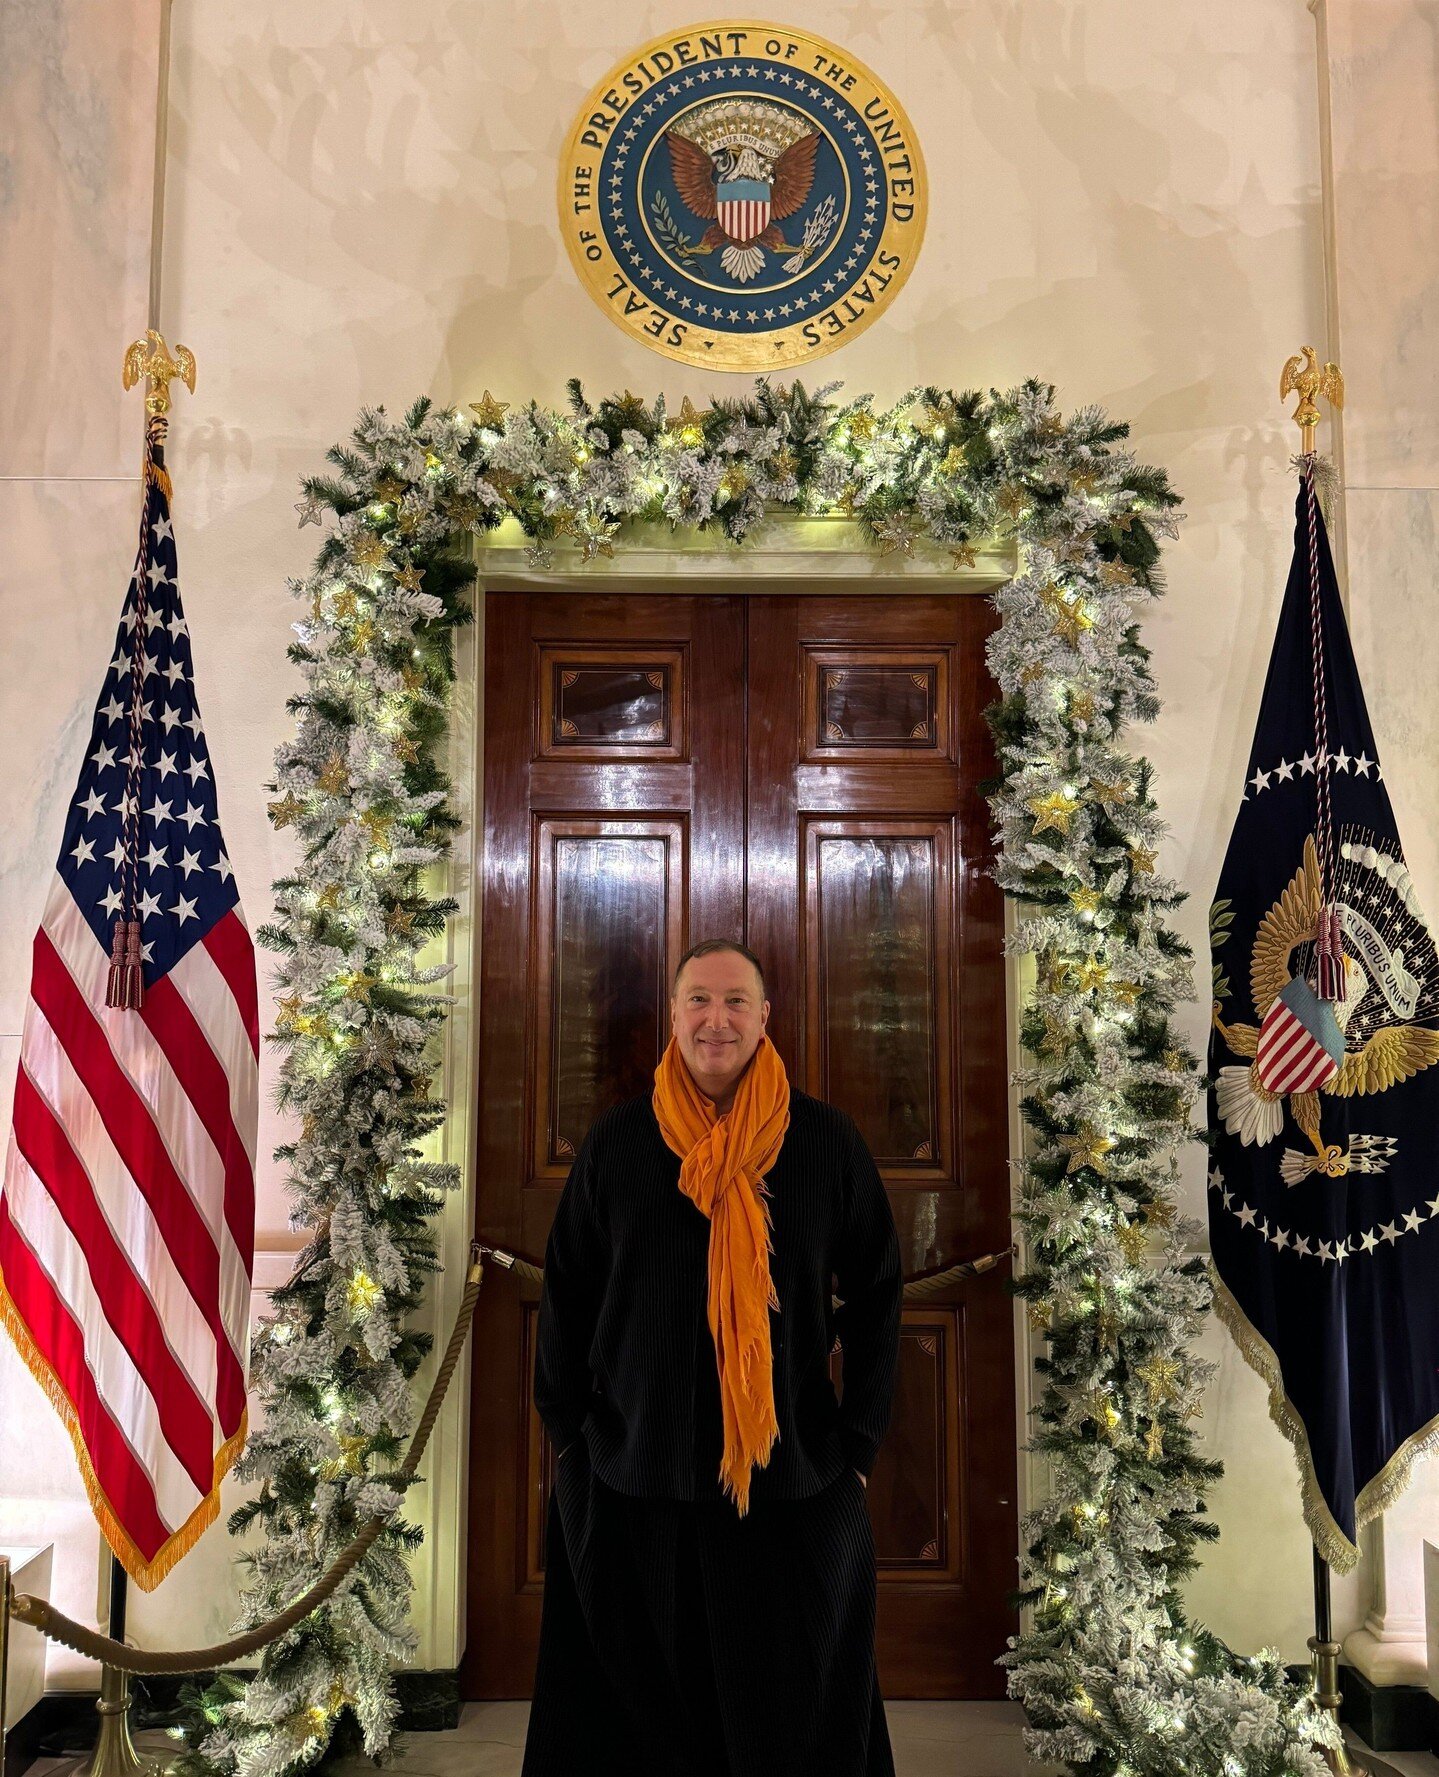 What a magical and unforgettable experience to visit The White House! It truly was an incredible honor to experience a night filled with festive joy, enchanting decorations, and the warmth of the holiday season in our nation's capital. The Blue Room,